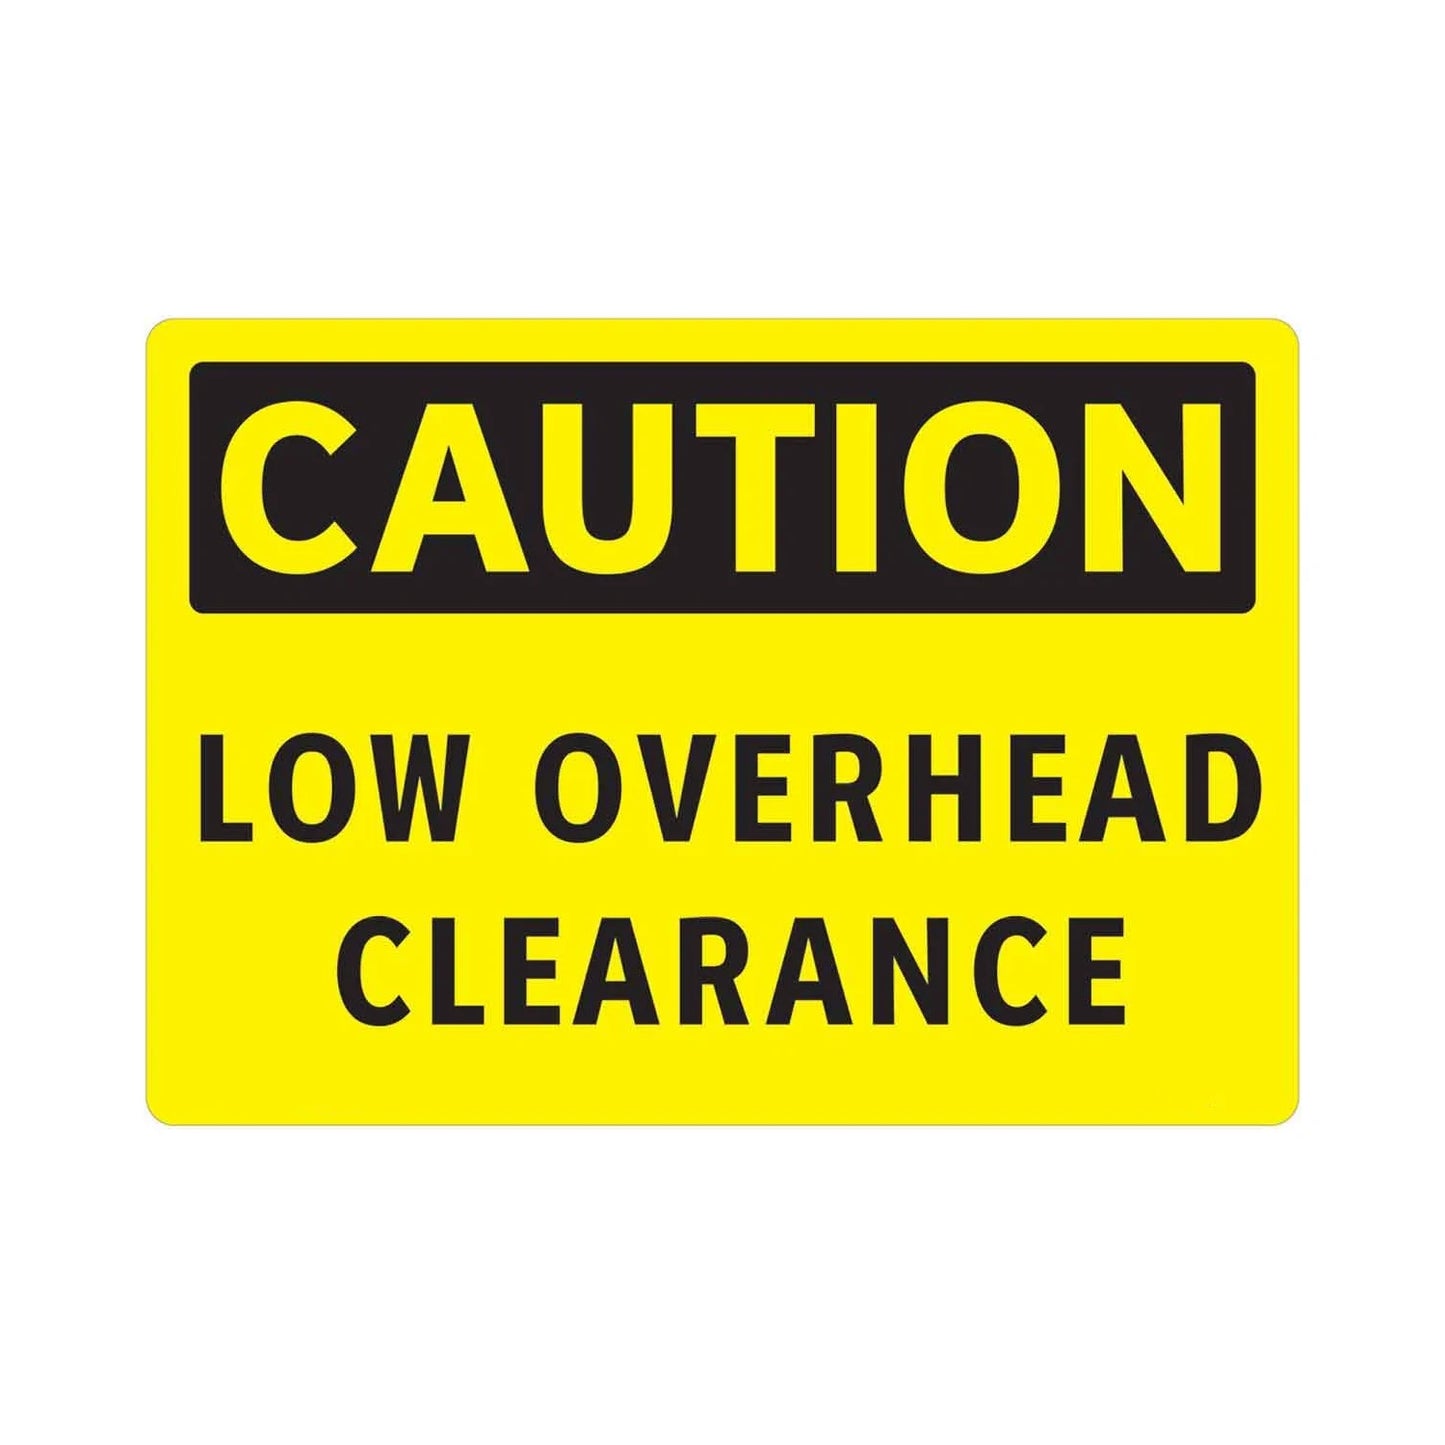 CAUTION Low Overhead Clearance sign 01